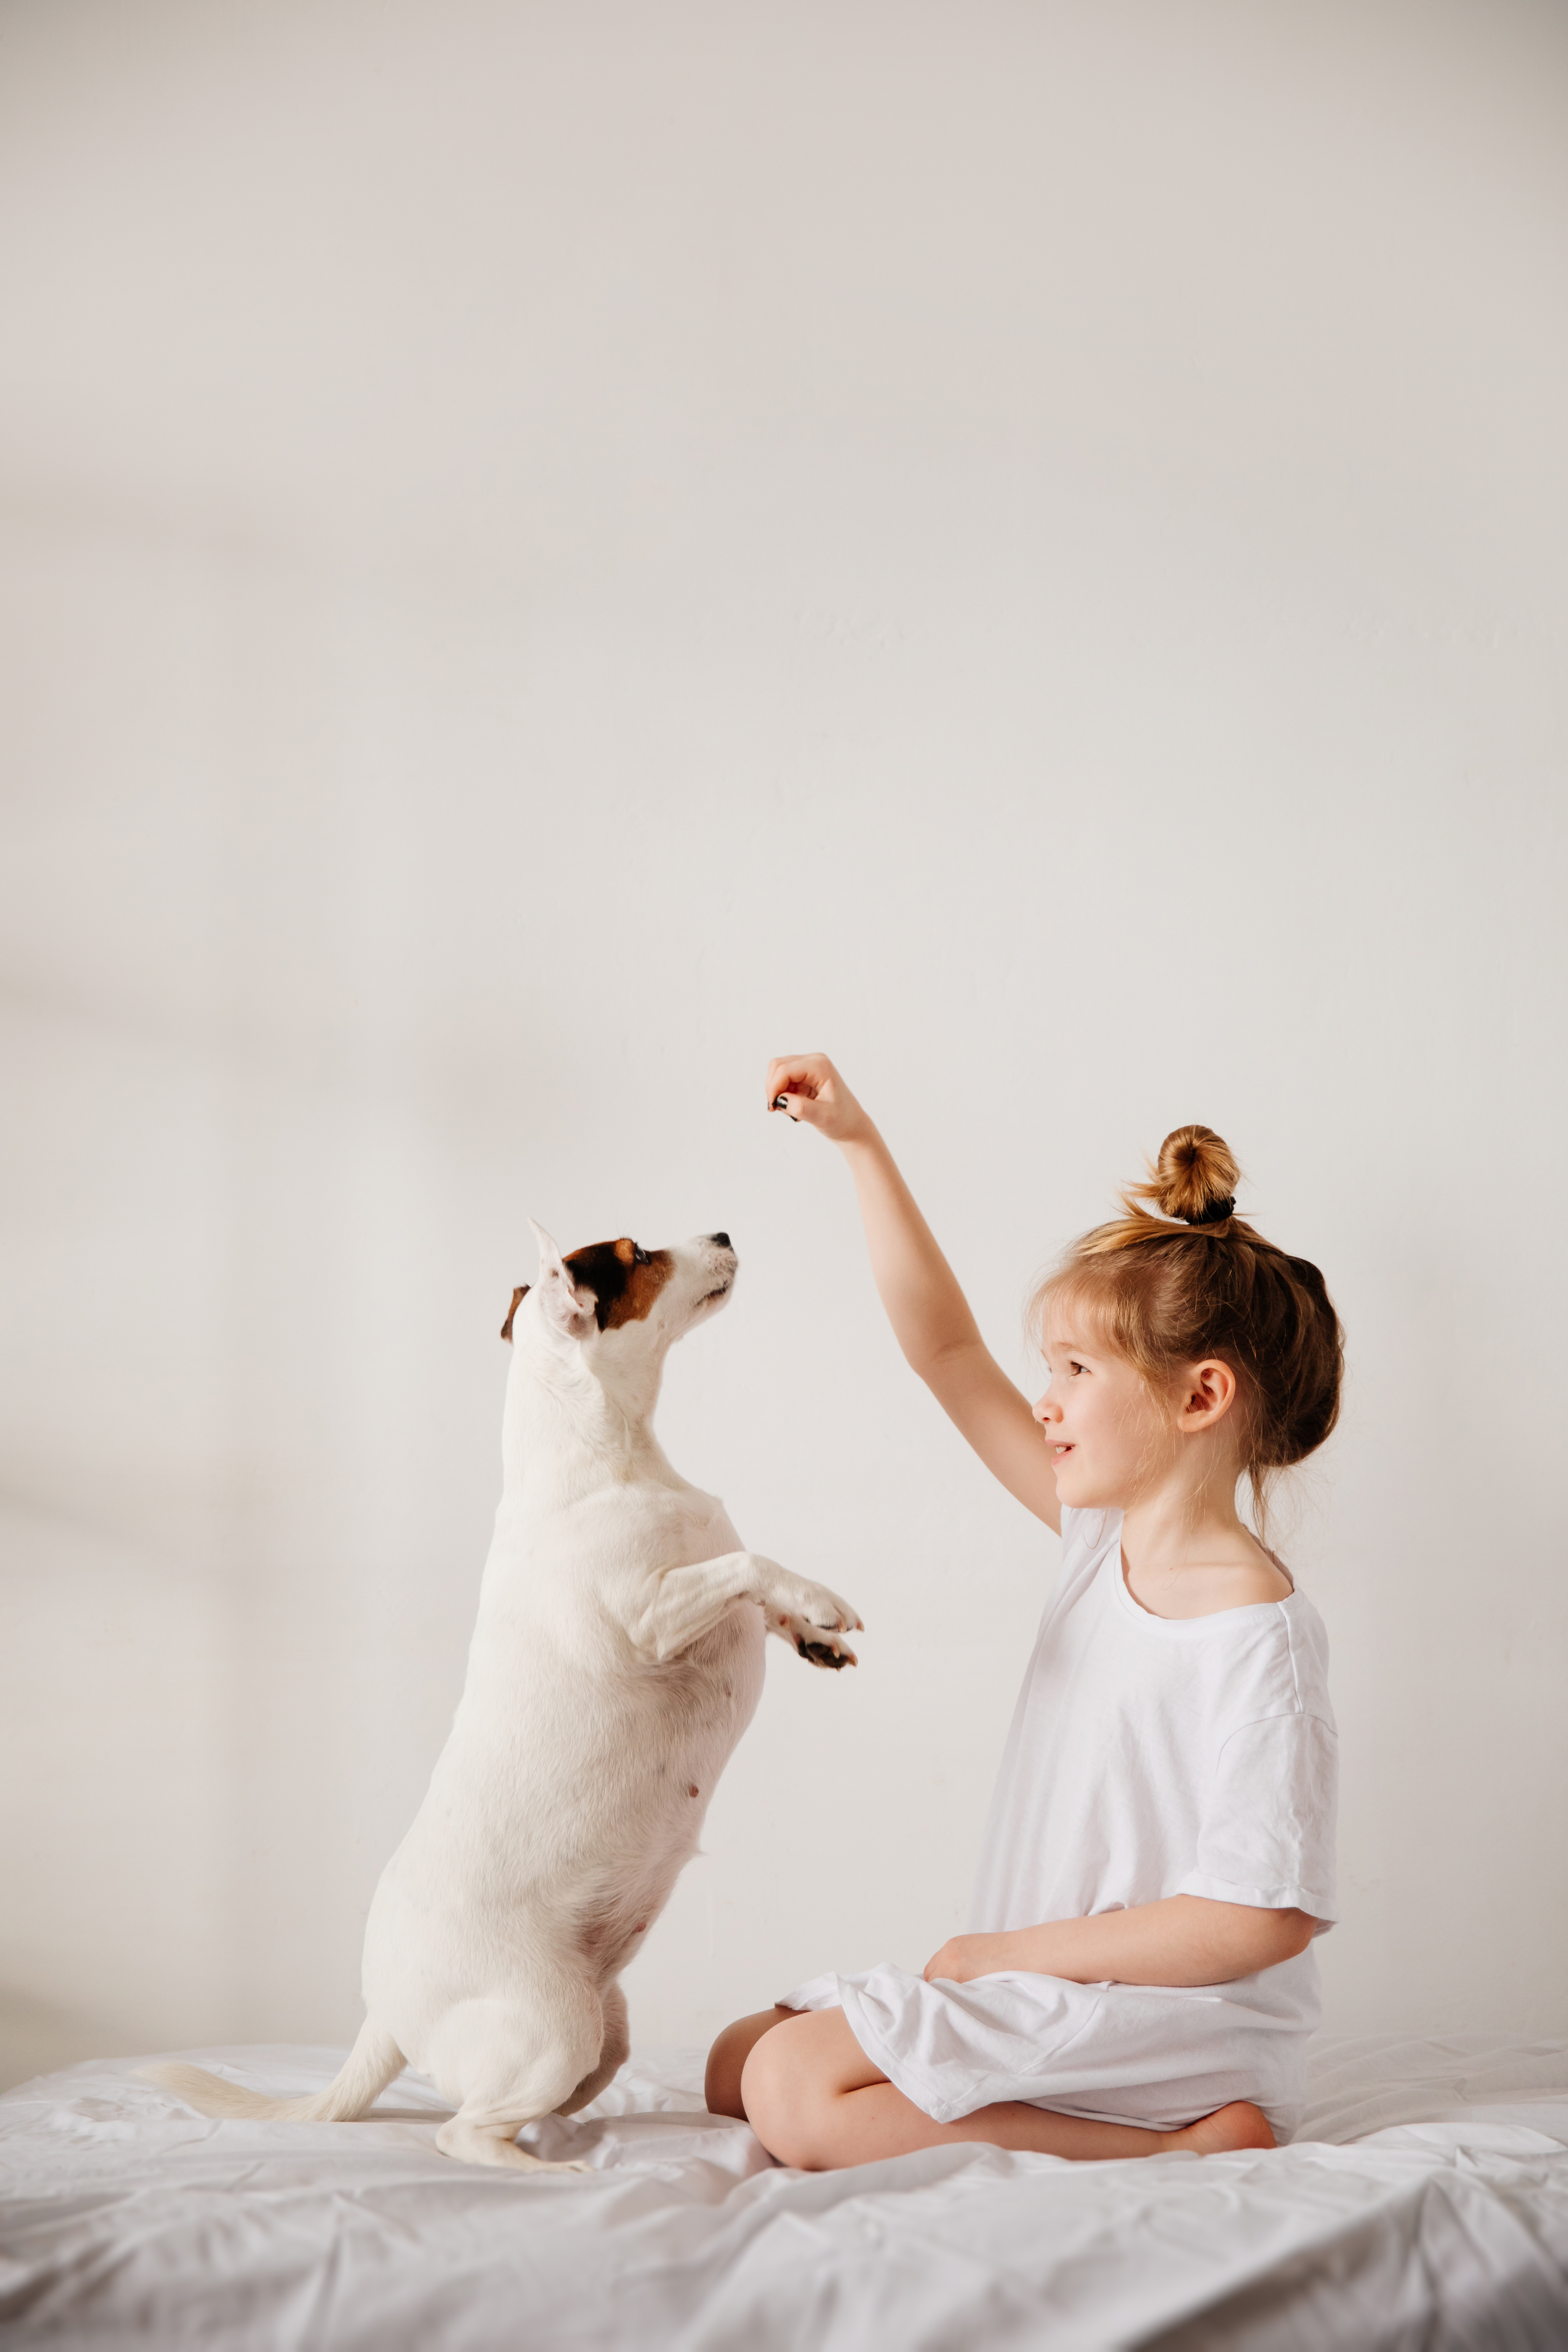 A girl training her dog in the comfort of her home - provided by professionals at Dog Training Elite in Mesa, AZ.